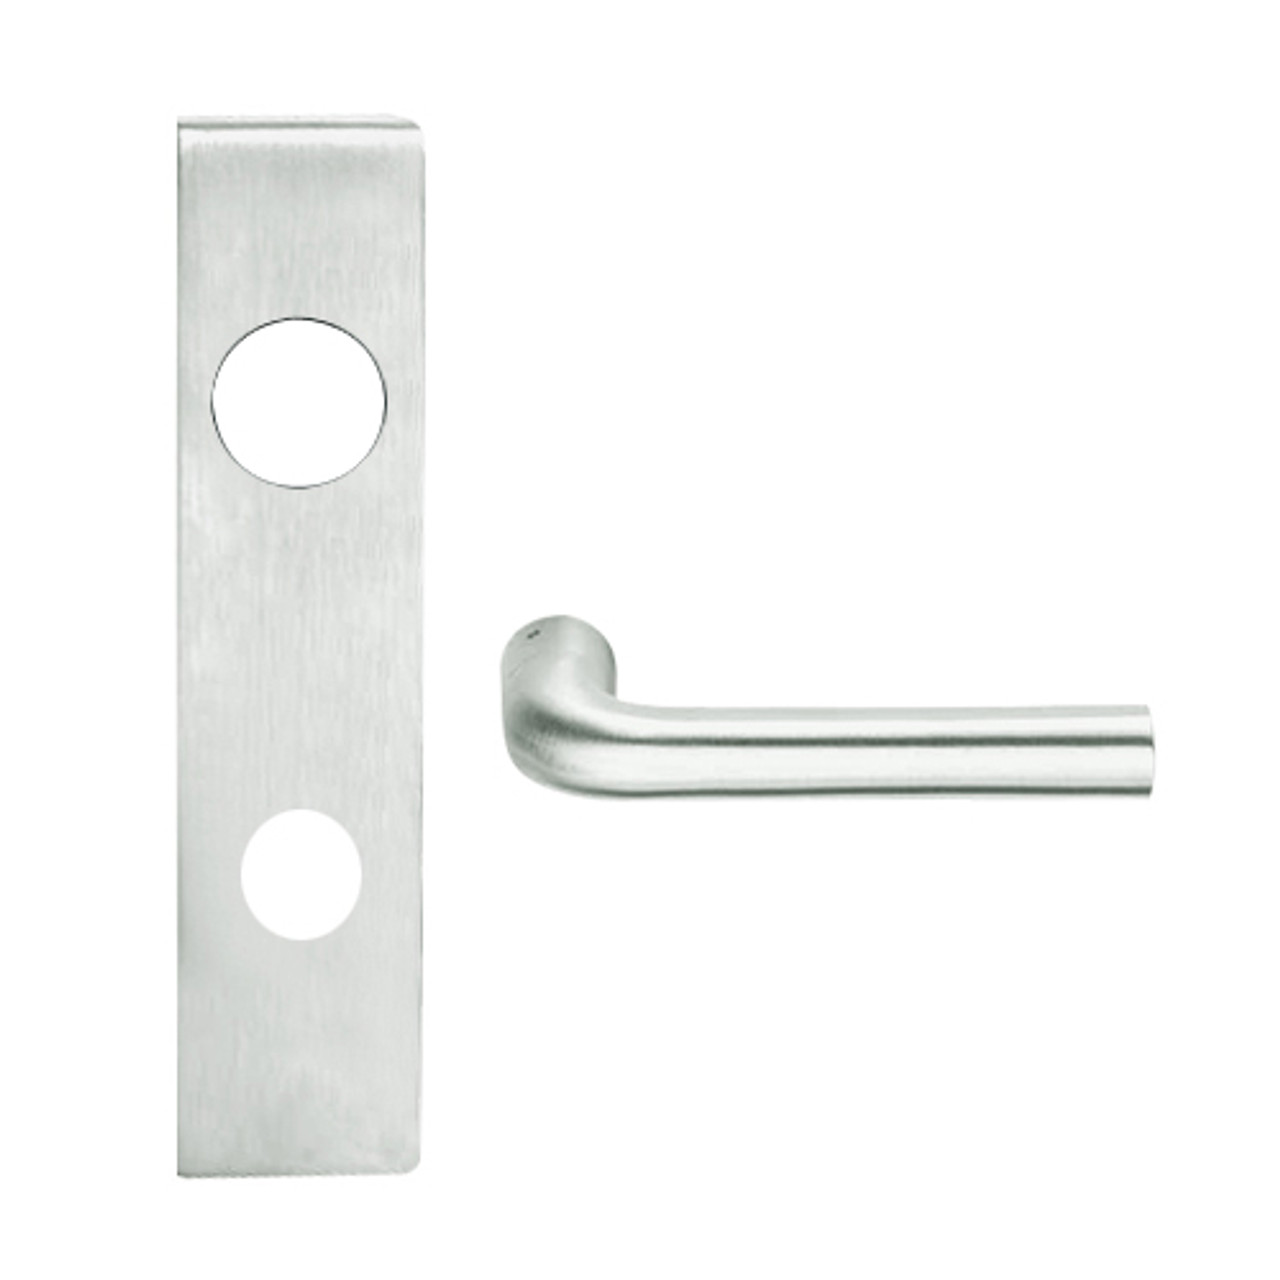 L9050J-02L-619 Schlage L Series Entrance Commercial Mortise Lock with 02 Cast Lever Design Prepped for FSIC in Satin Nickel